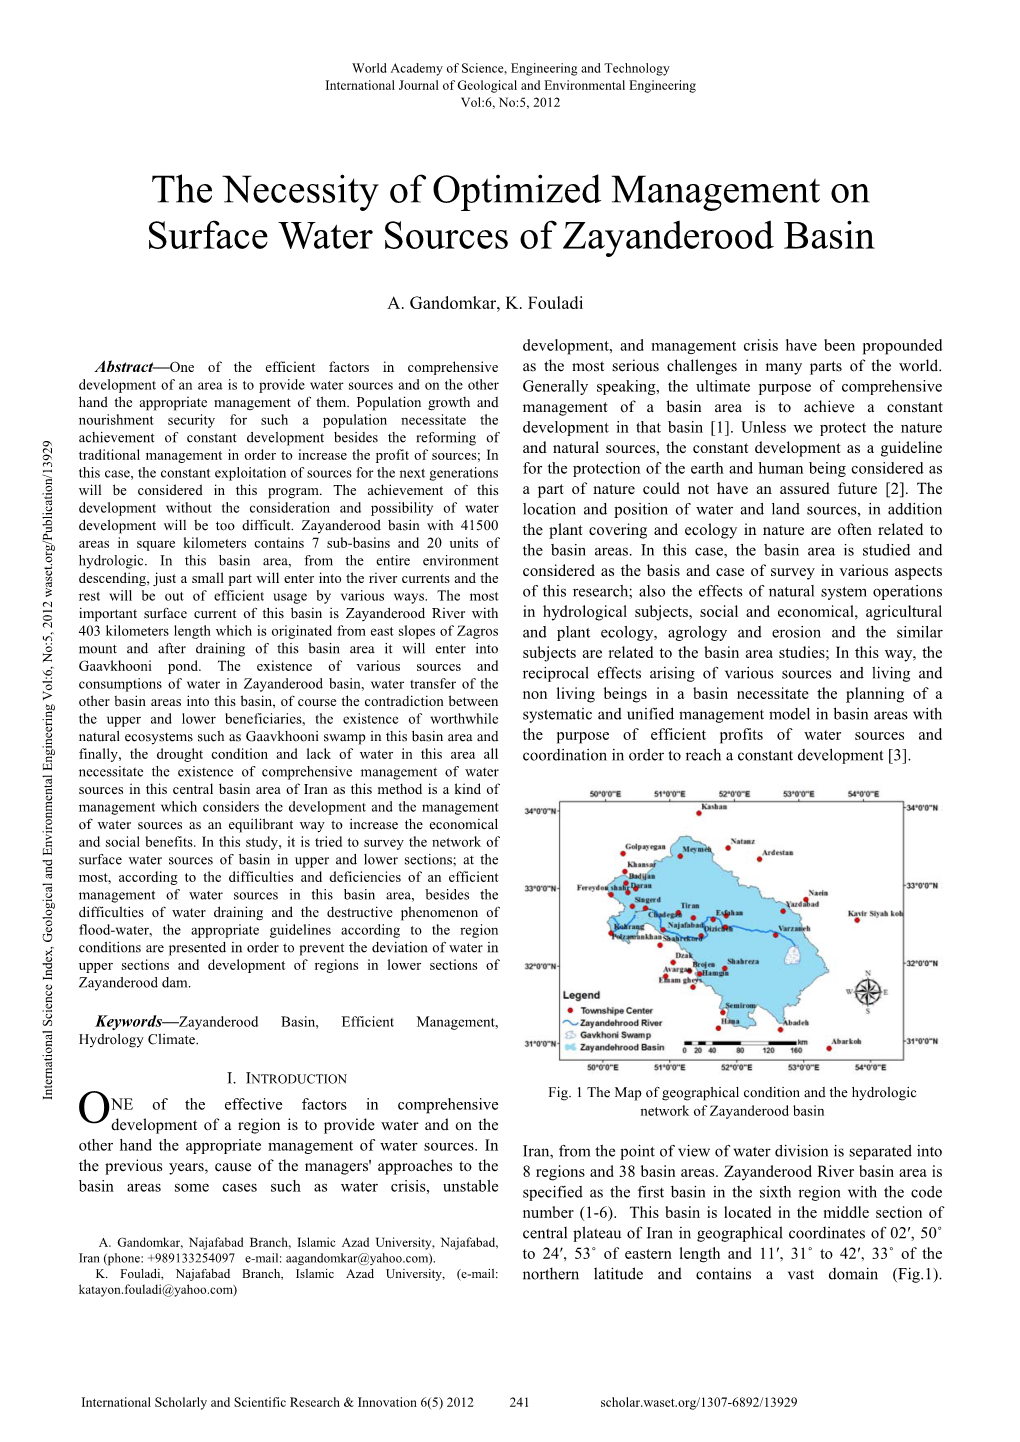 The Necessity of Optimized Management on Surface Water Sources of Zayanderood Basin